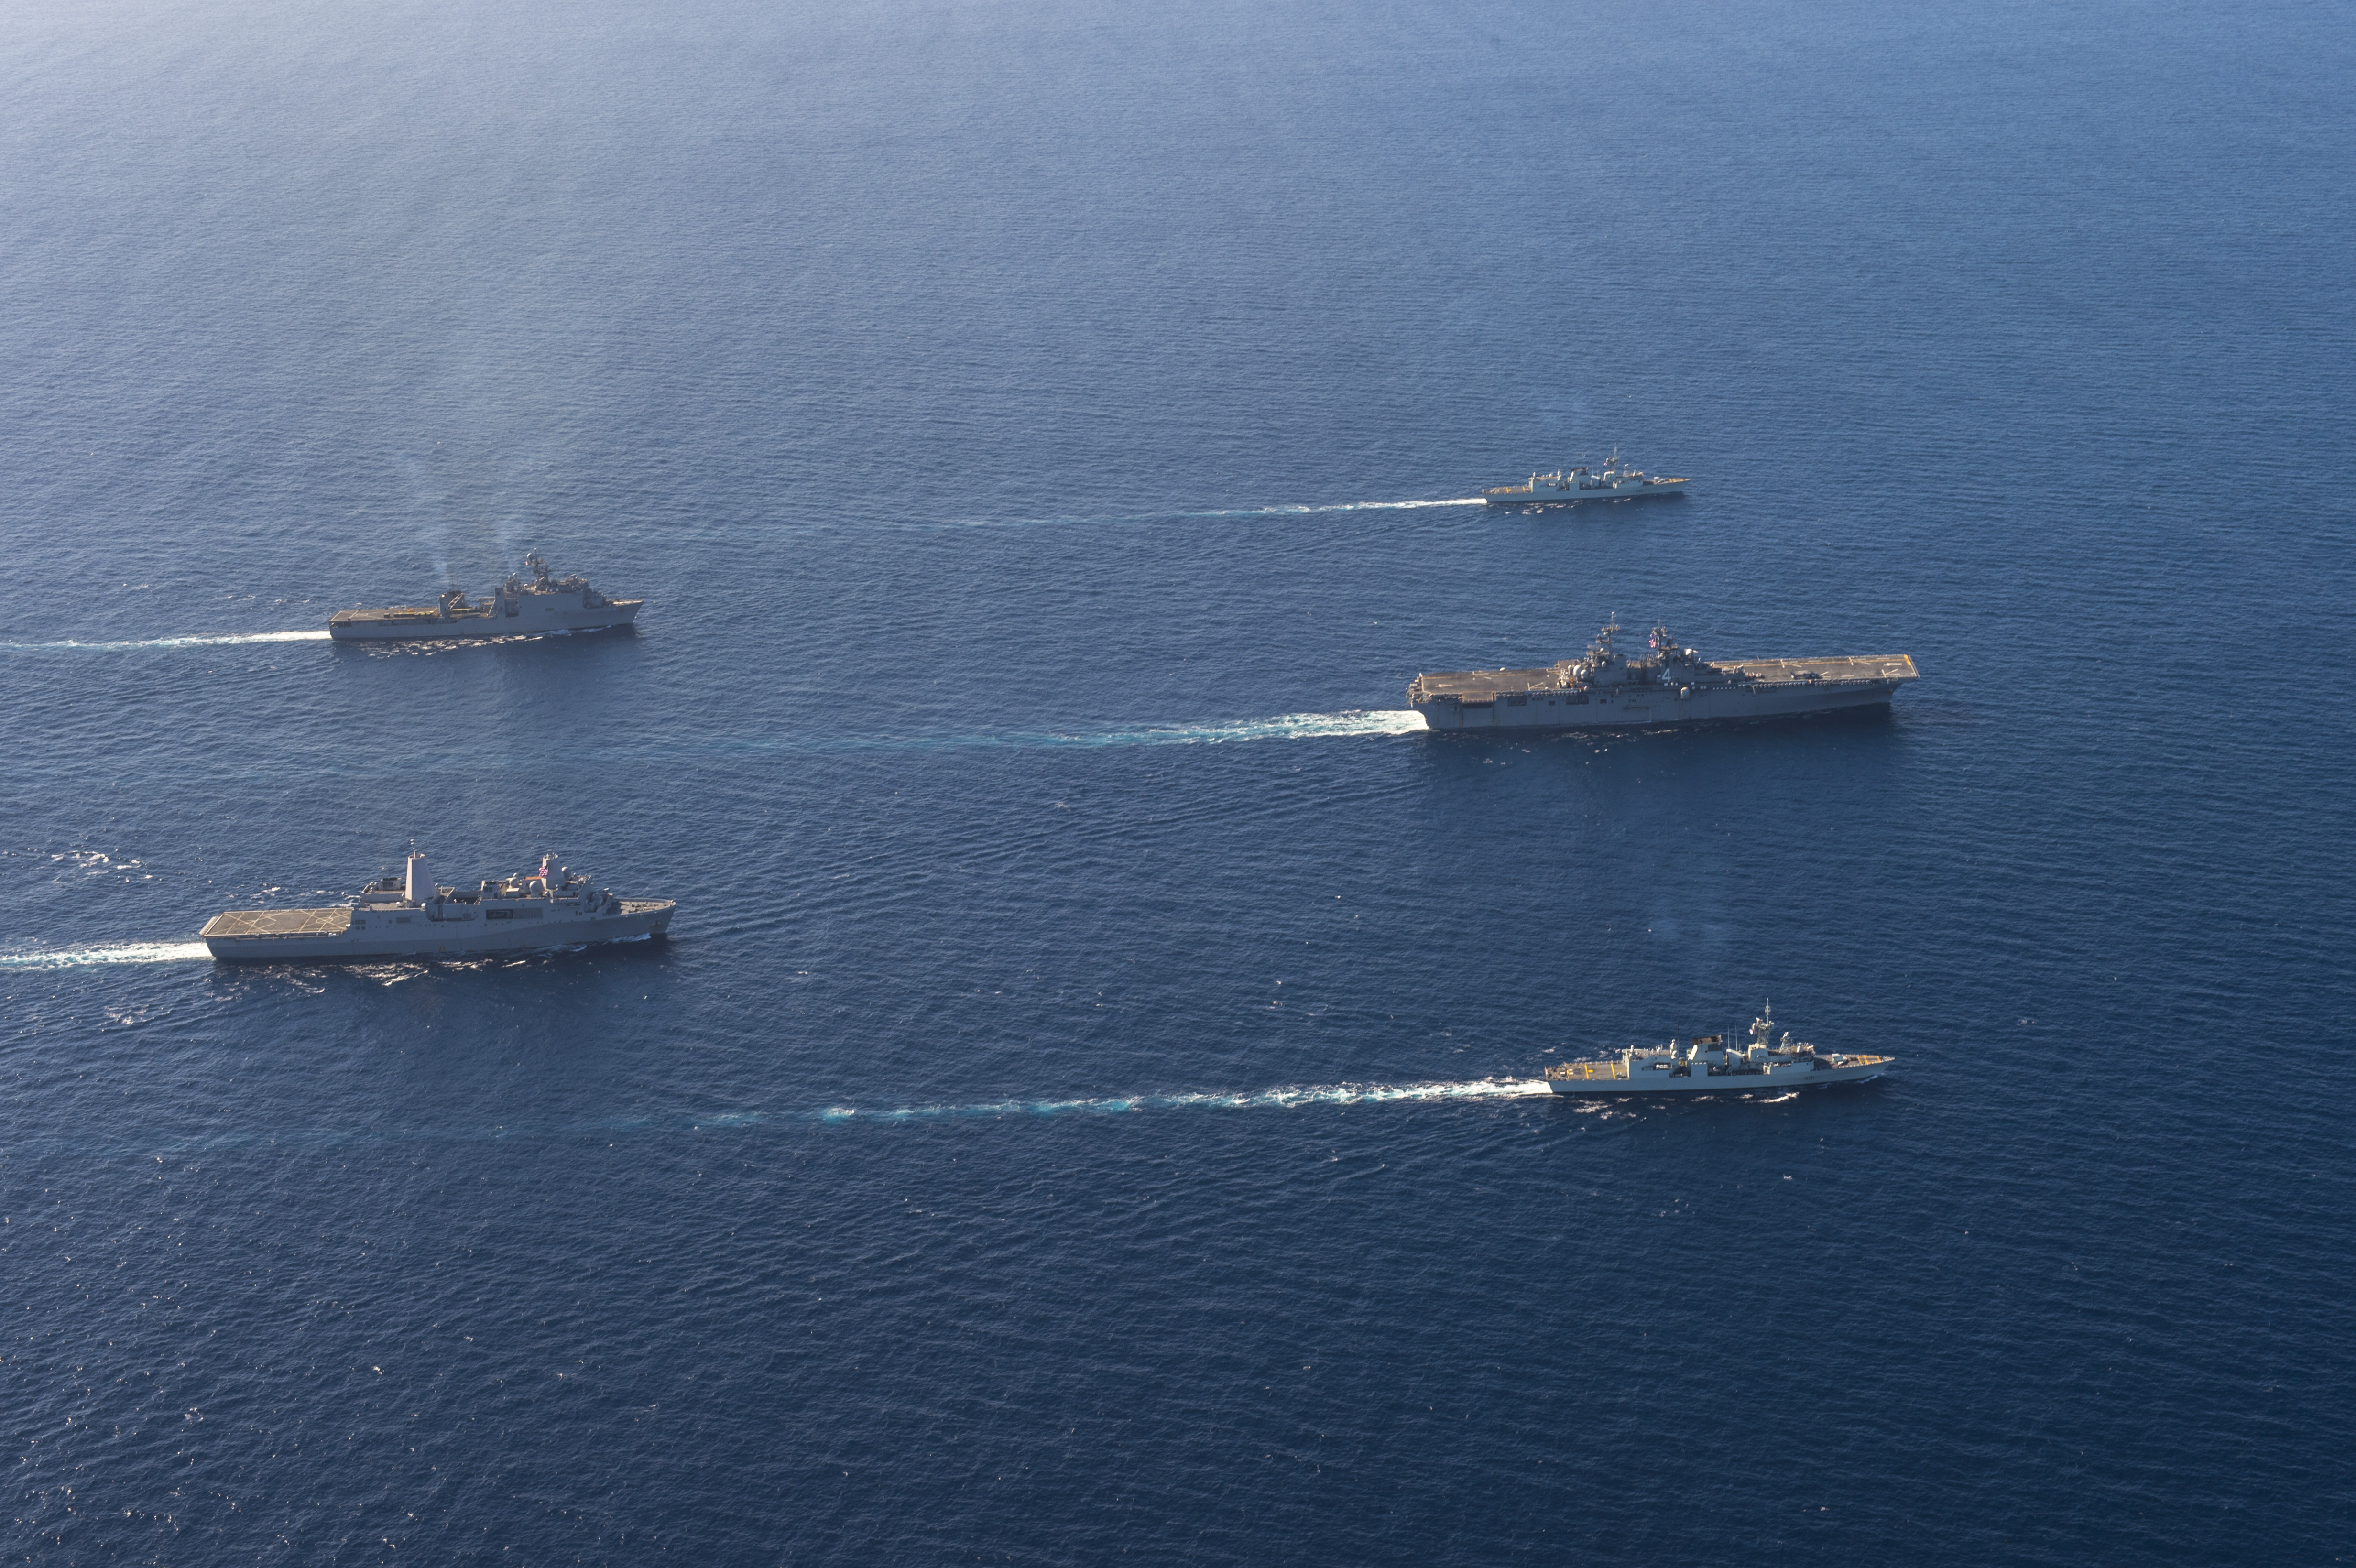 The Boxer Amphibious Ready Group (ARG), composed of amphibious assault ship USS Boxer (LHD 4), amphibious transport dock ship USS New Orleans (LPD 18), dock landing ship USS Harpers Ferry (LSD 49) along with HMCS Vancouver (FF 331) and HMCS Calgary (FF 335) steam in formation on Nov. 5, 2015. US Navy photo.